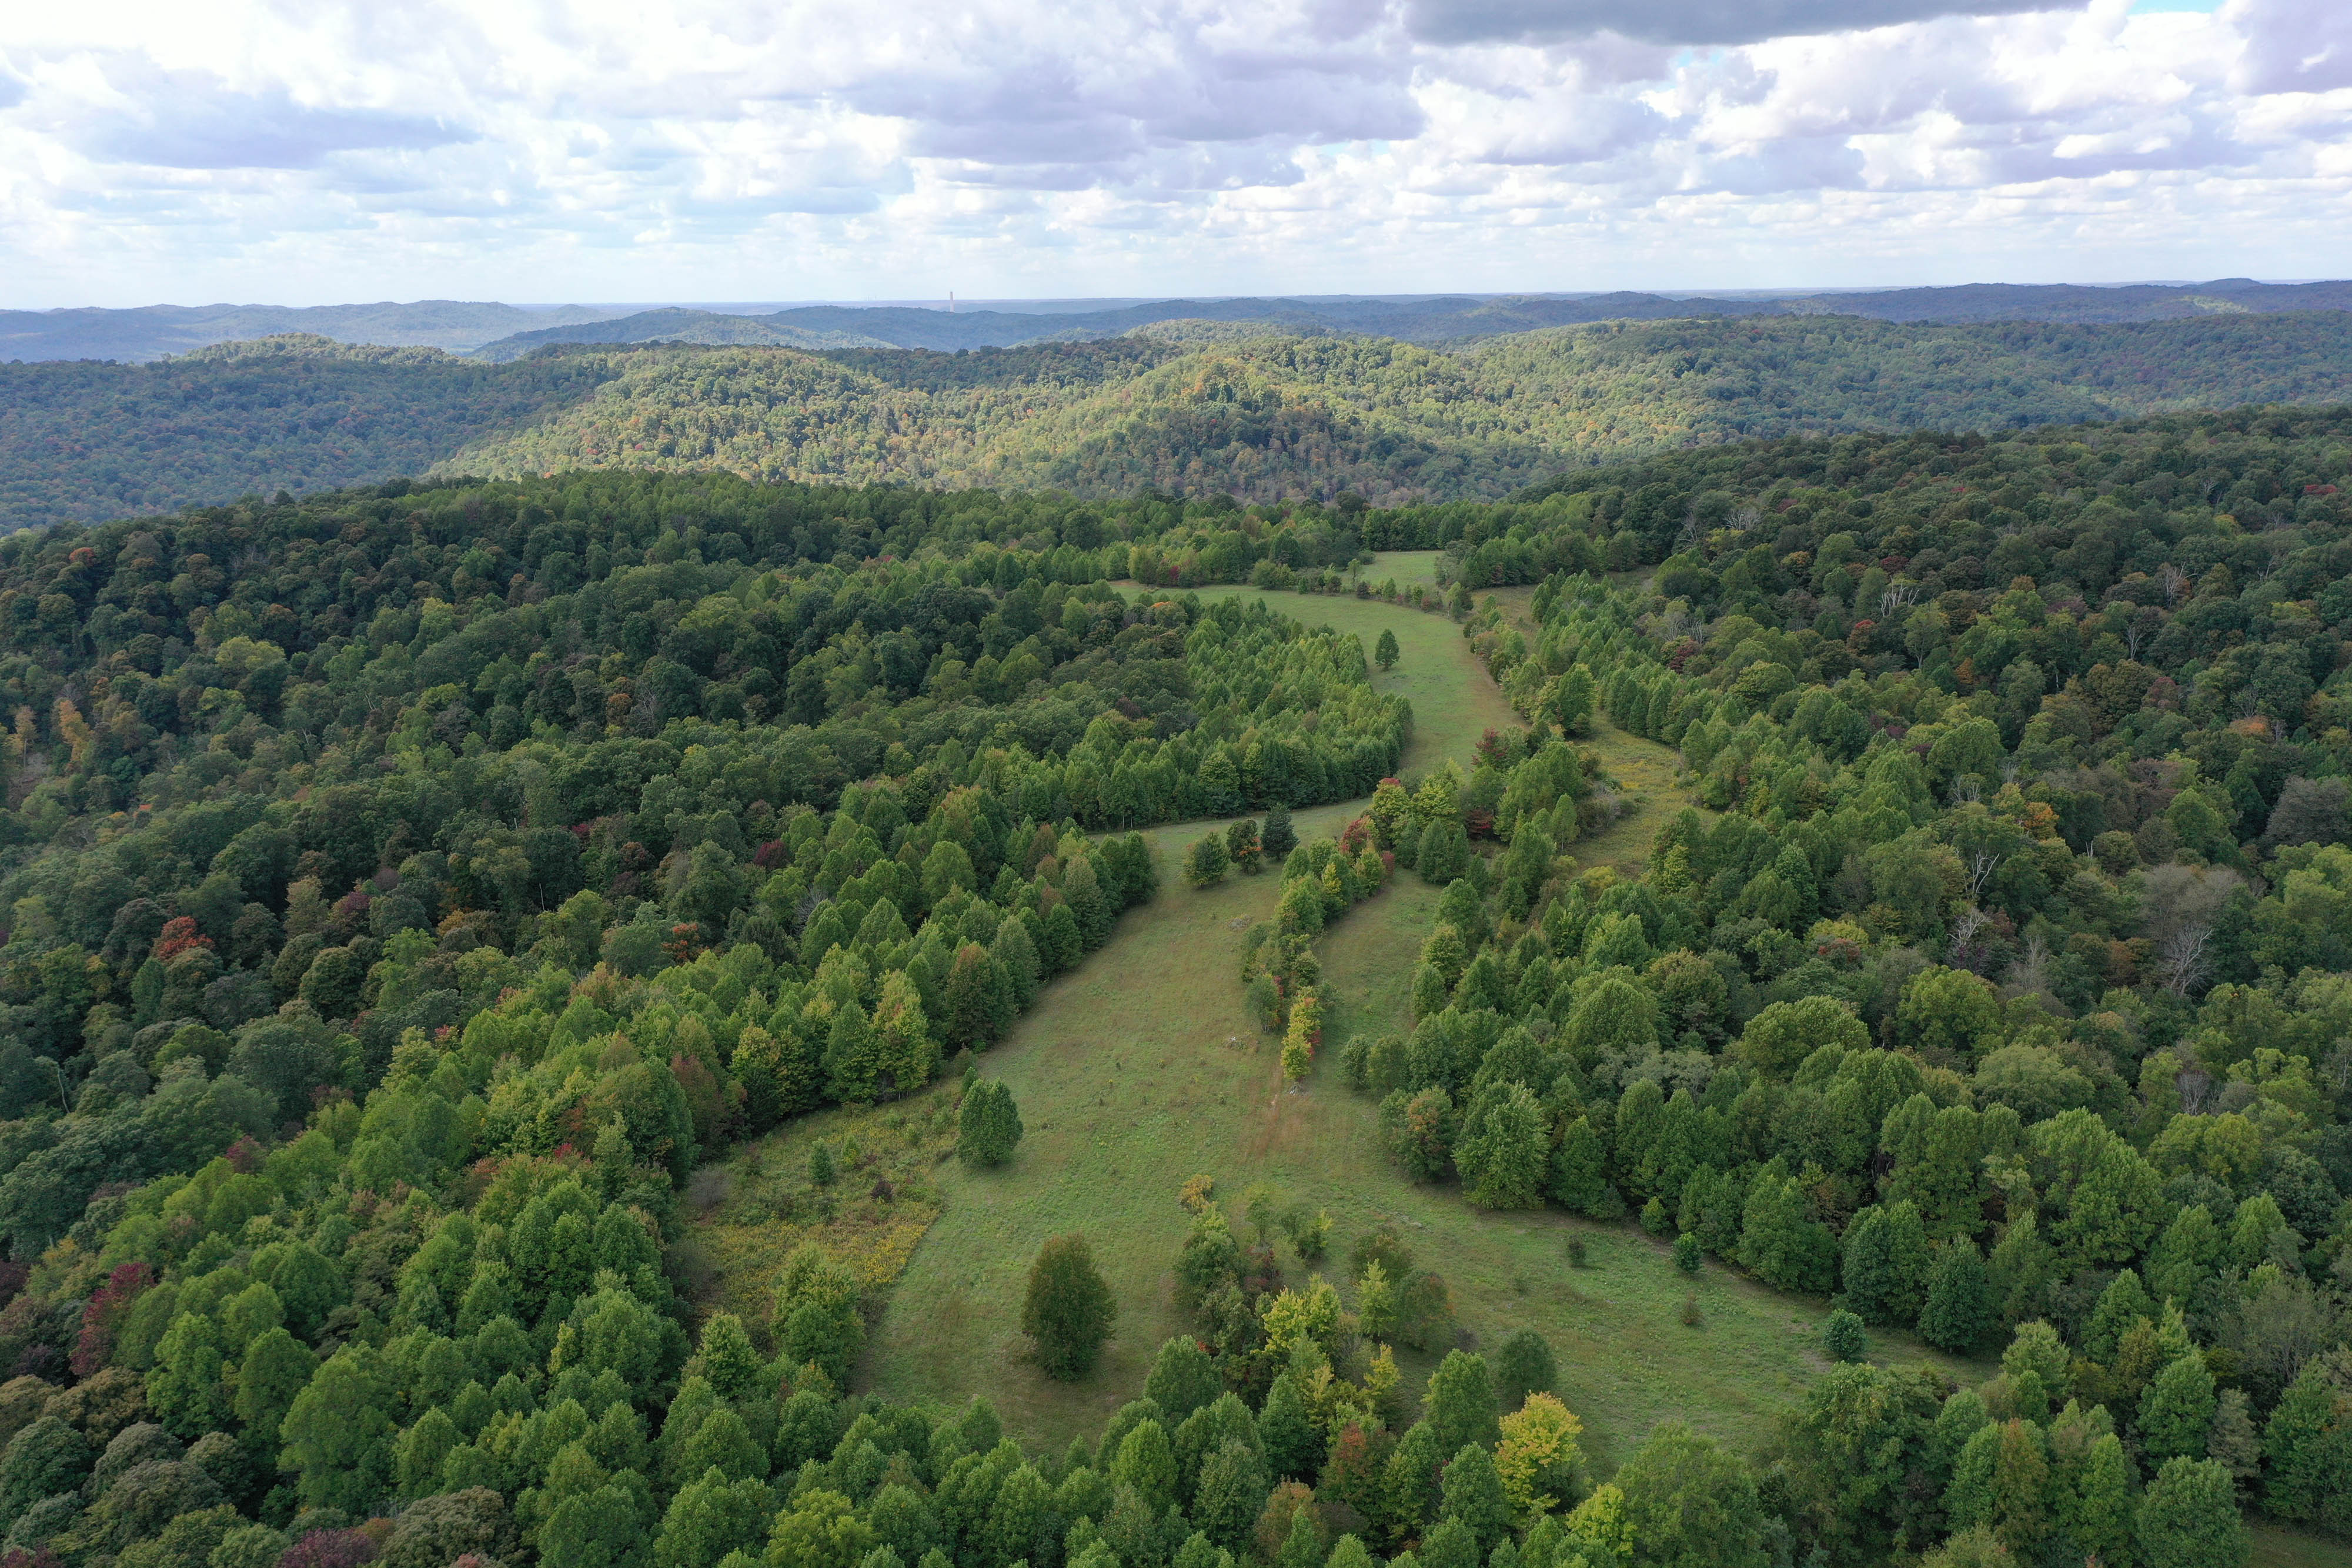 Aerial view of a swath of green land winding through a densely wooded landscape.